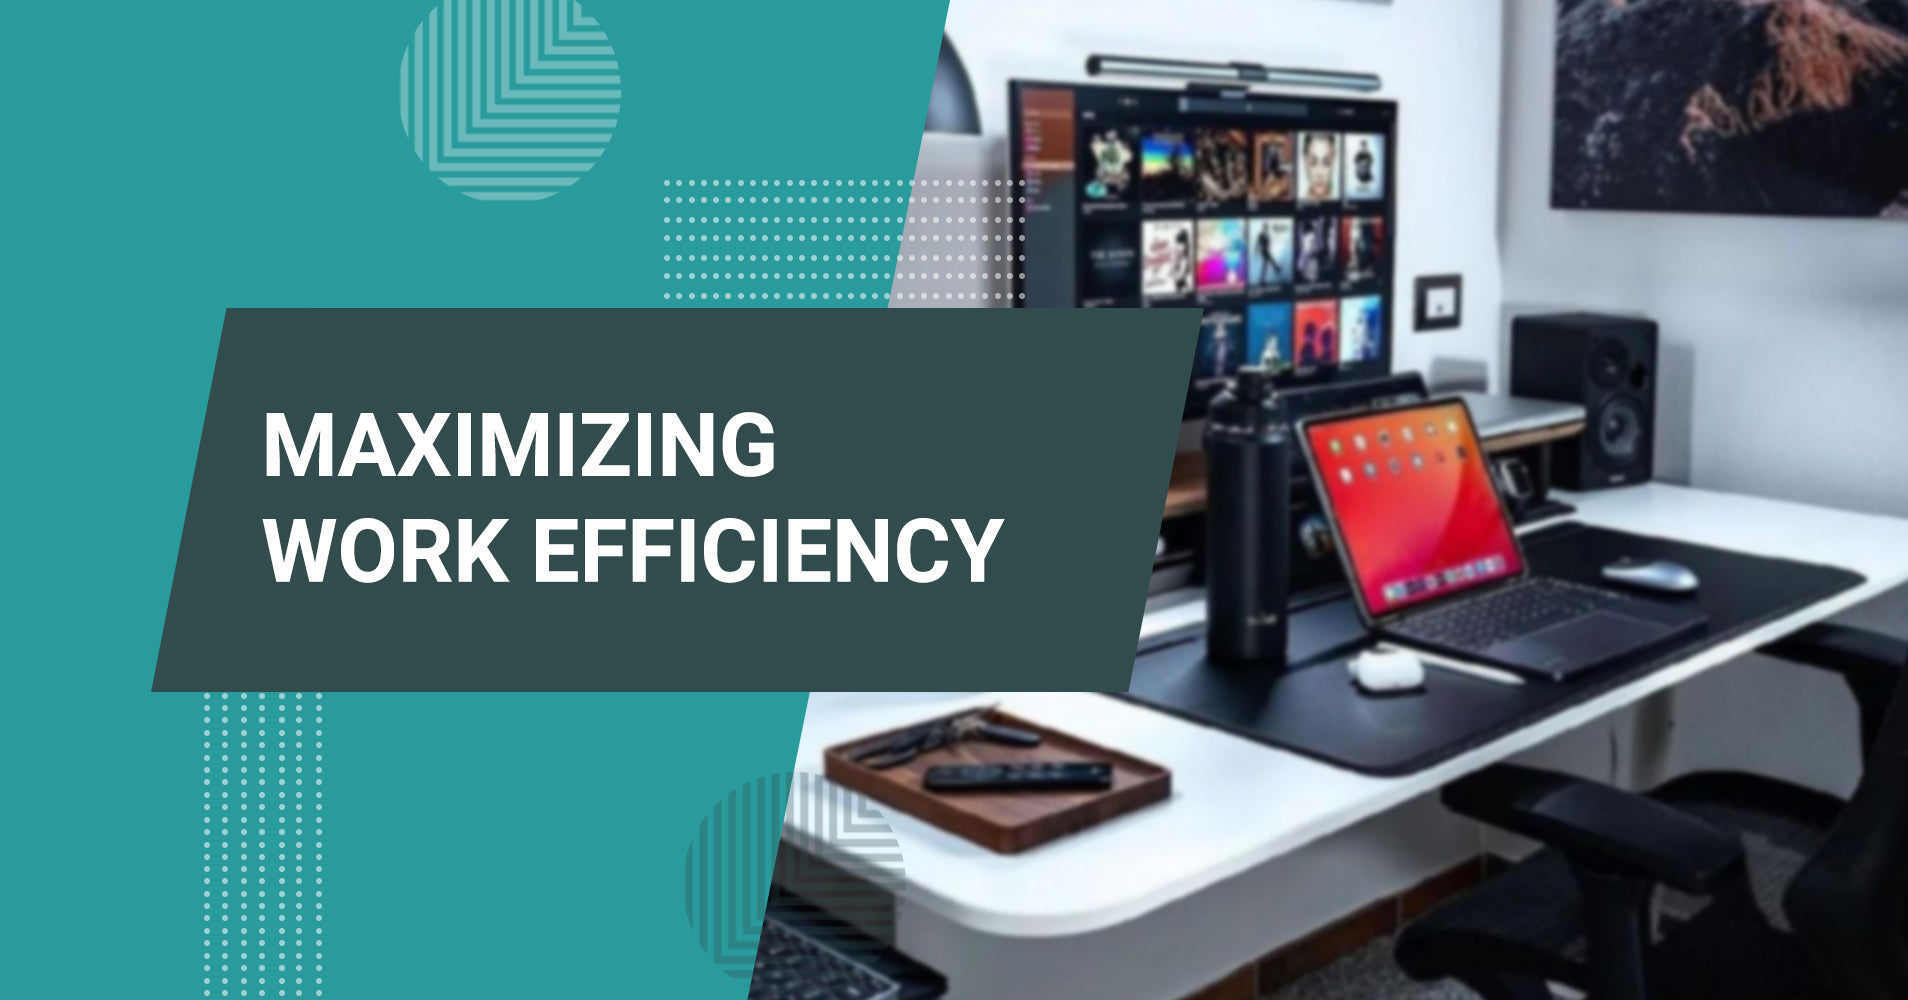 3 Types of Office Equipment to improve work efficiency